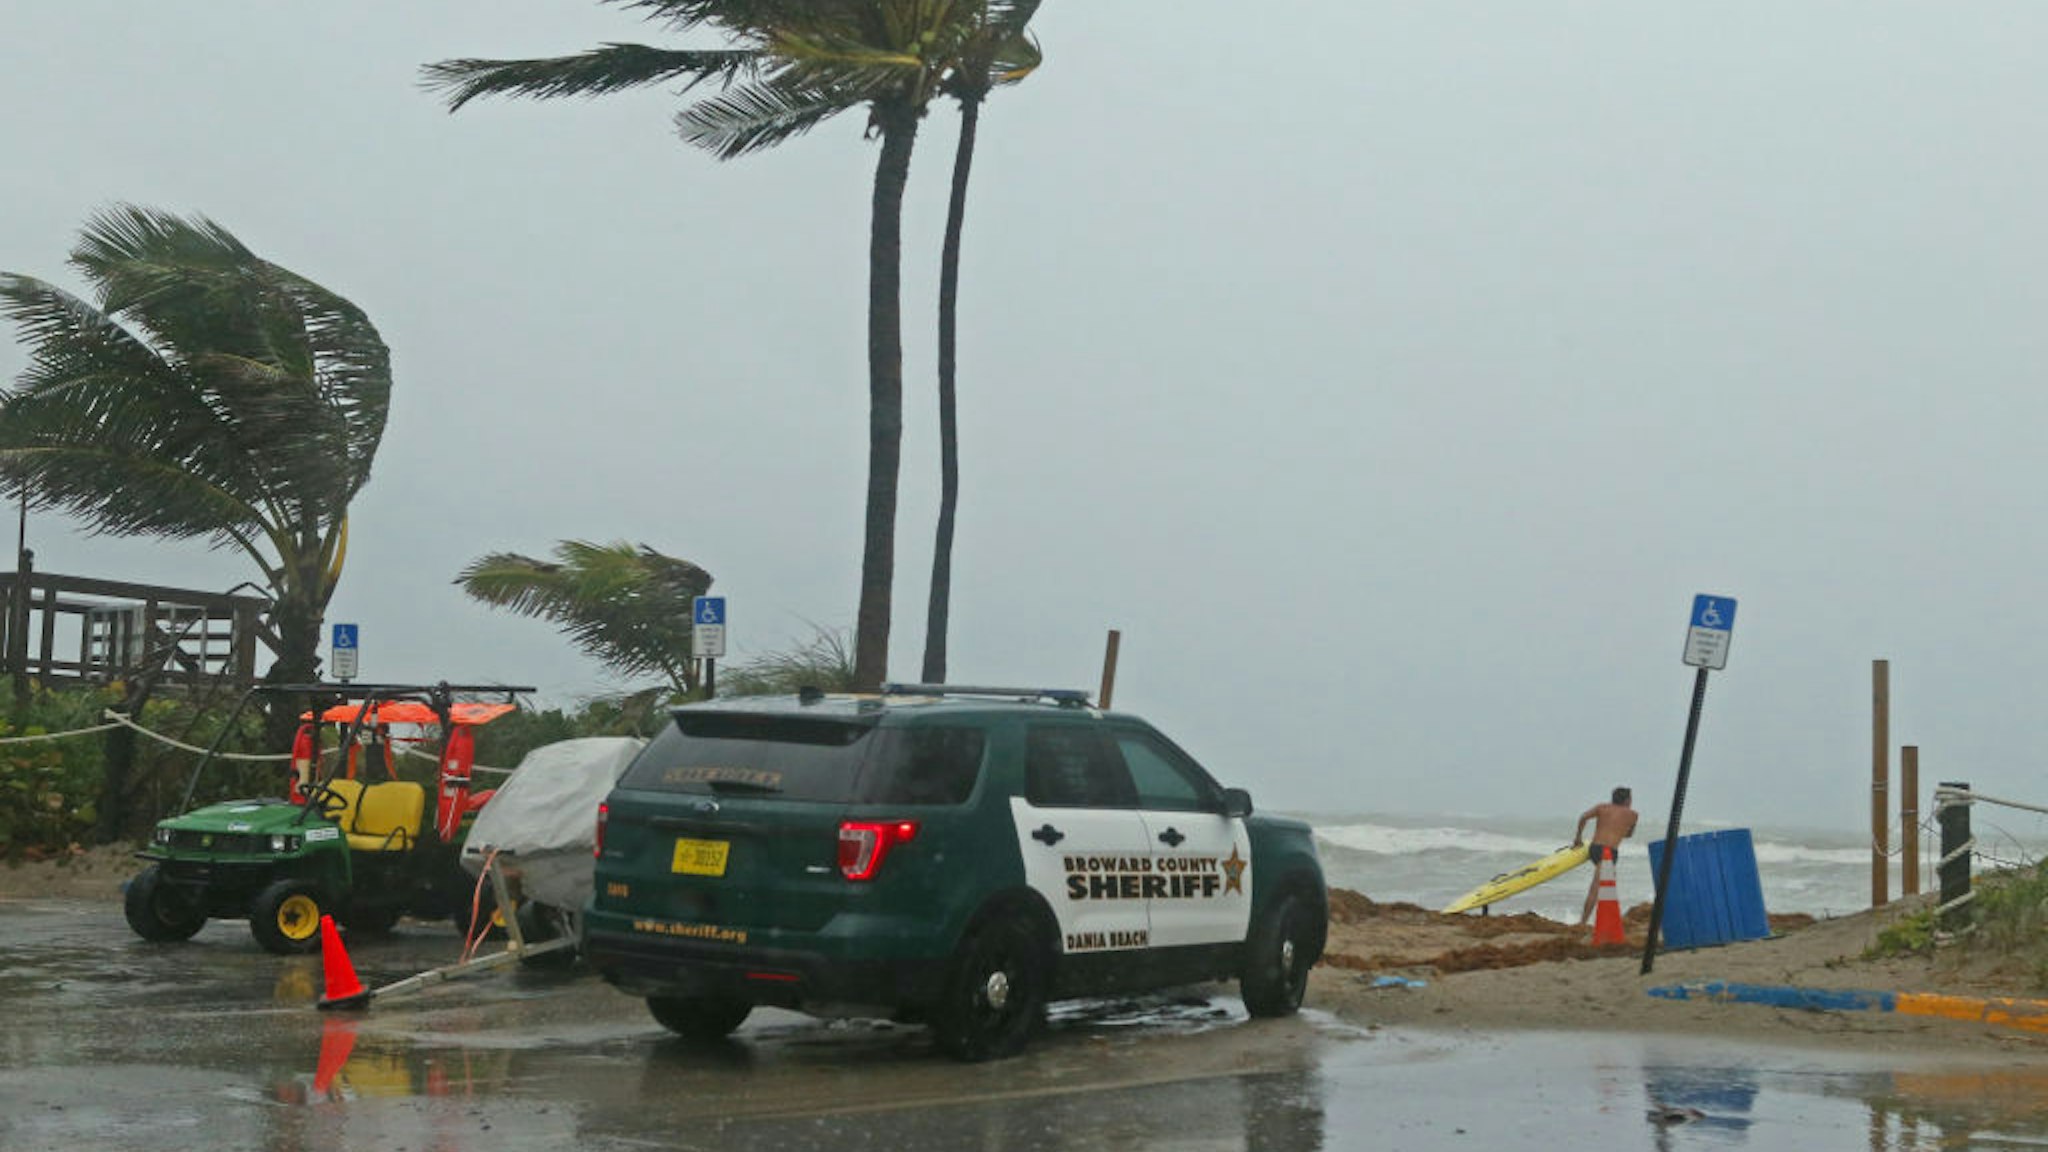 A Broward Sheriff's Office vehicle at the Dania Beach Pier in Dania Beach, Fla., as Tropical Storm Gordon passes by South Florida with wind gusts and heavy rainfall for the Labor Day holiday on Monday, Sept. 3, 2018.